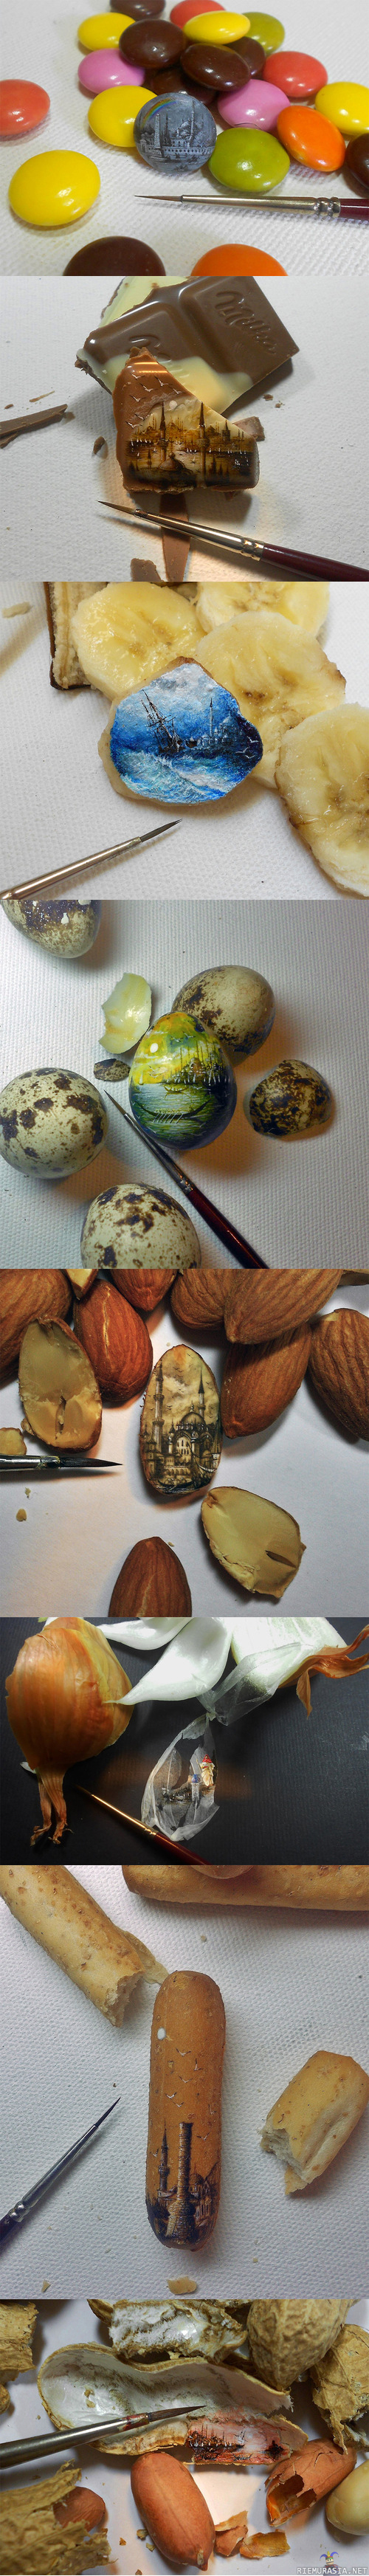 New Impossibly Tiny Landscapes Painted on Food - by Hasan Kale